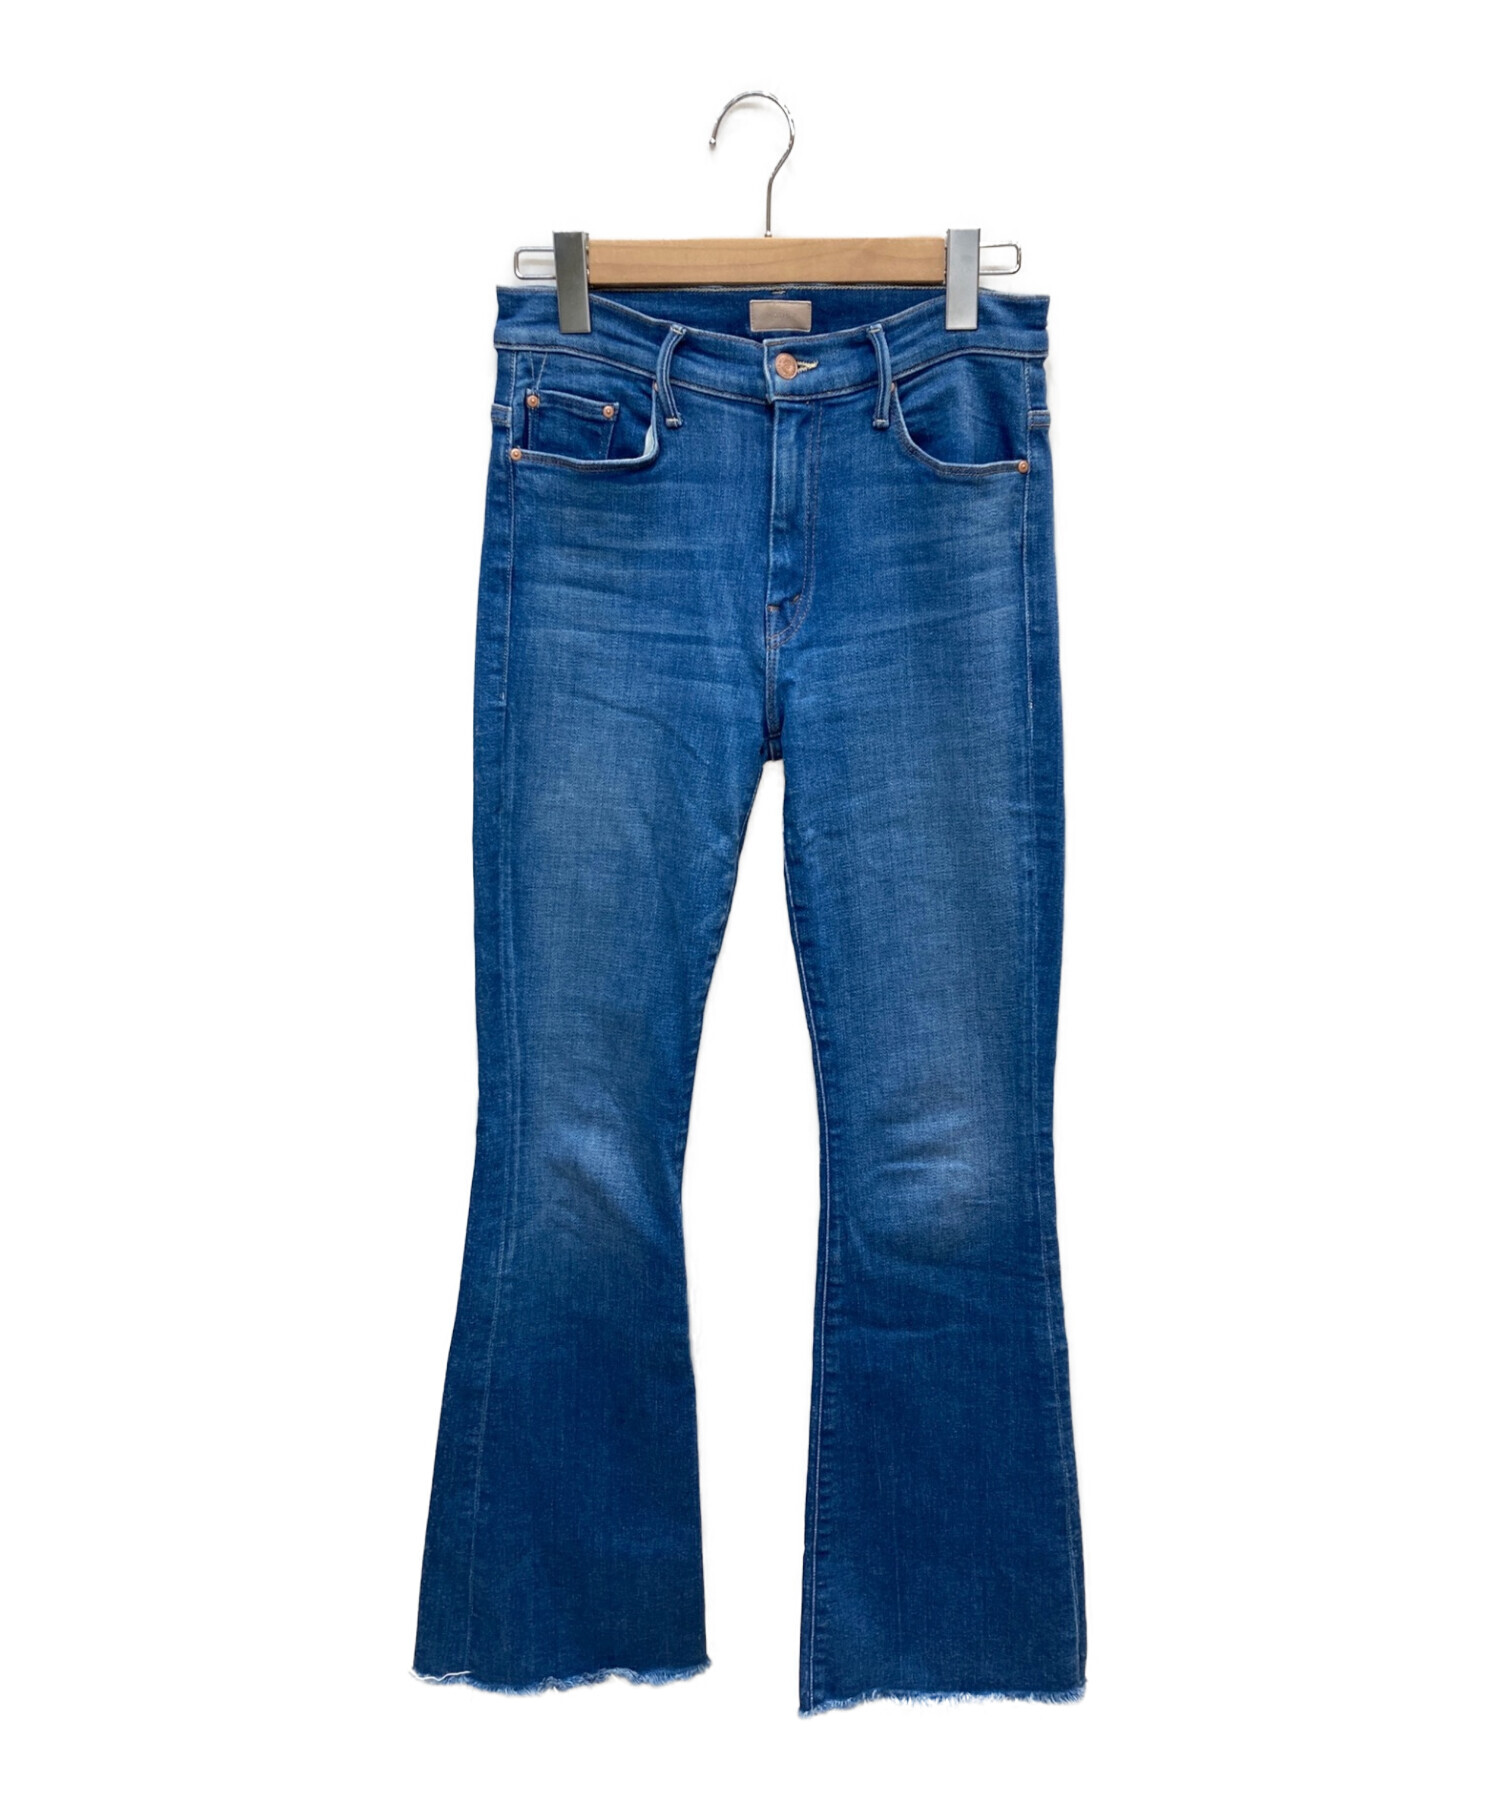 mother (マザー) the weekender fray mother jeans インディゴ サイズ:27